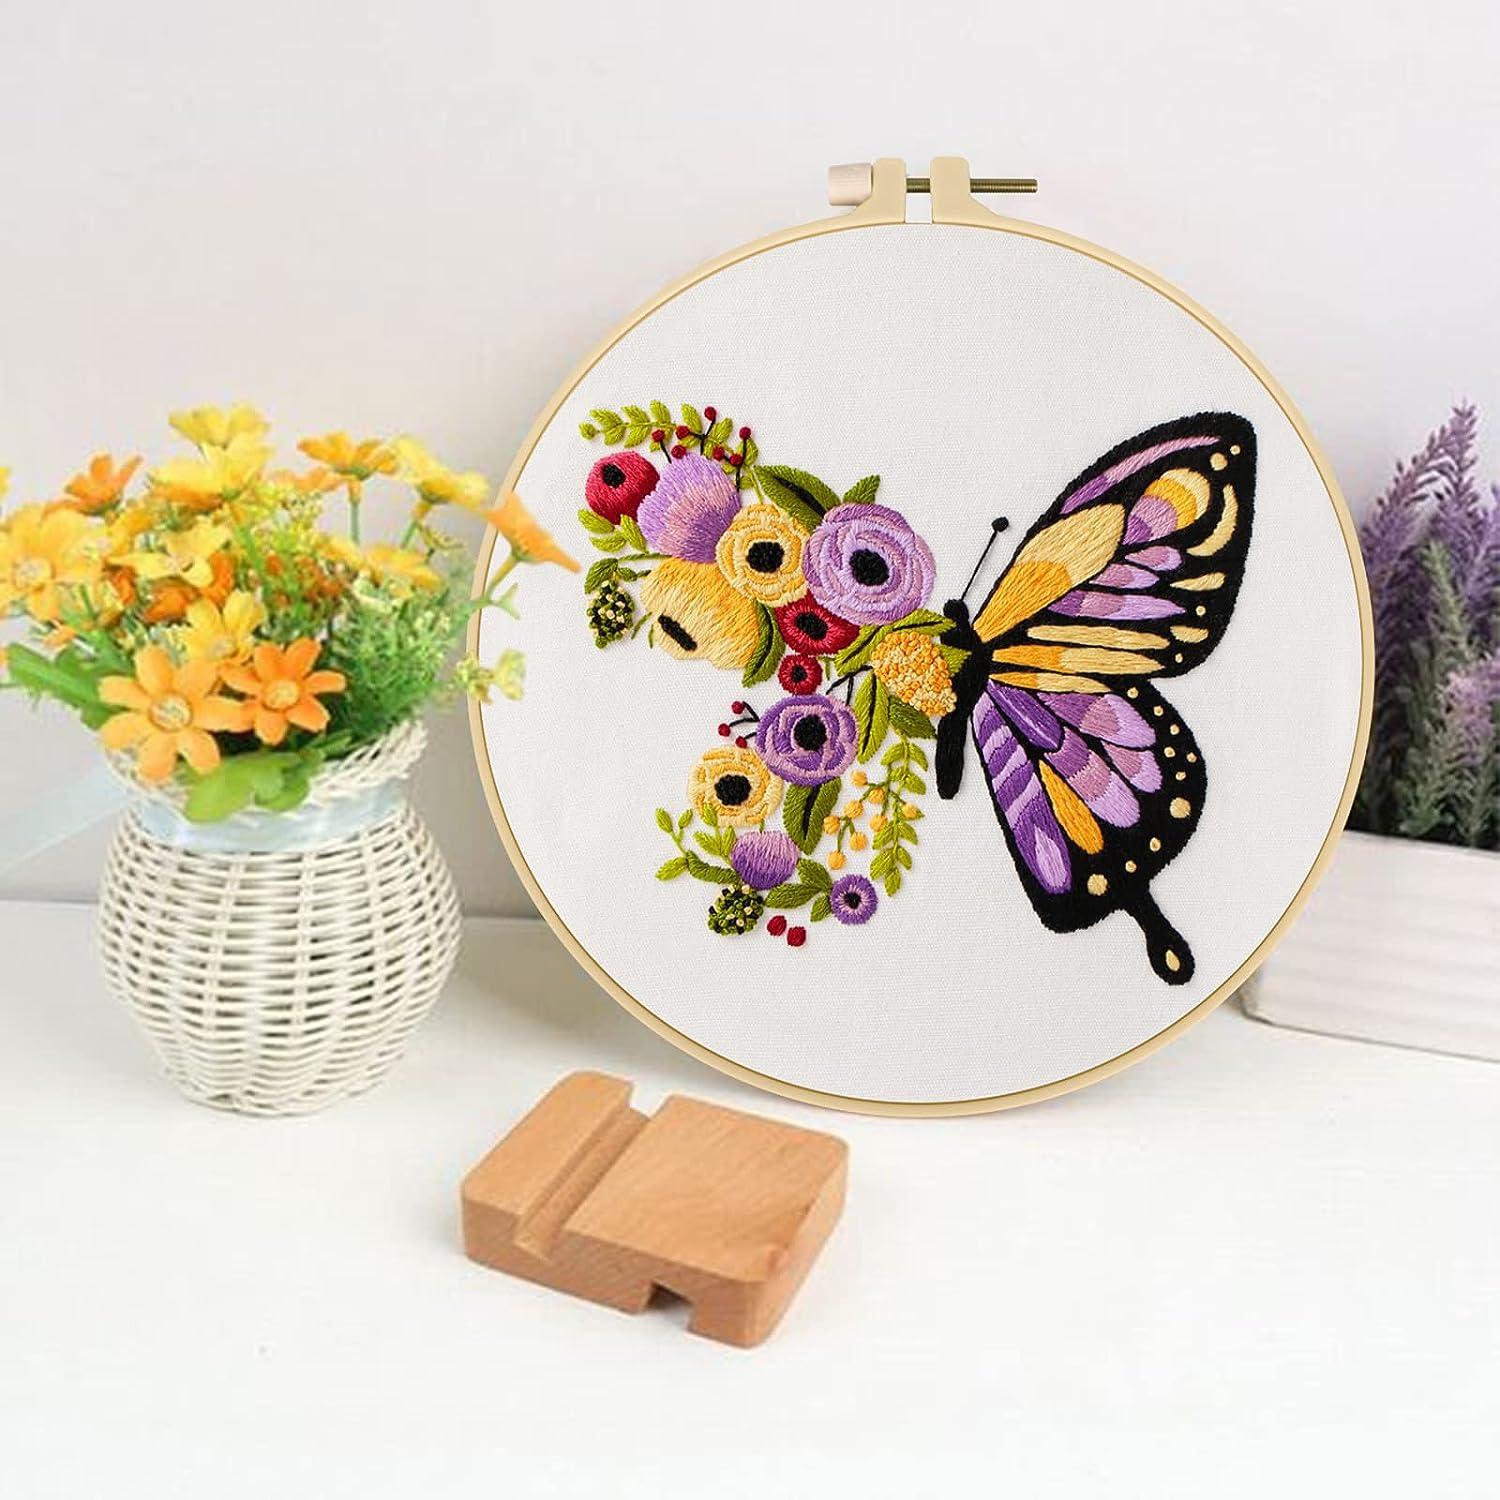 Anidaroel 3 Sets Butterfly Flower Pattern Embroidery Starter Kit for Beginners Stamped Cross Stitch Kits for Beginners Adults Include Embroidery Fab